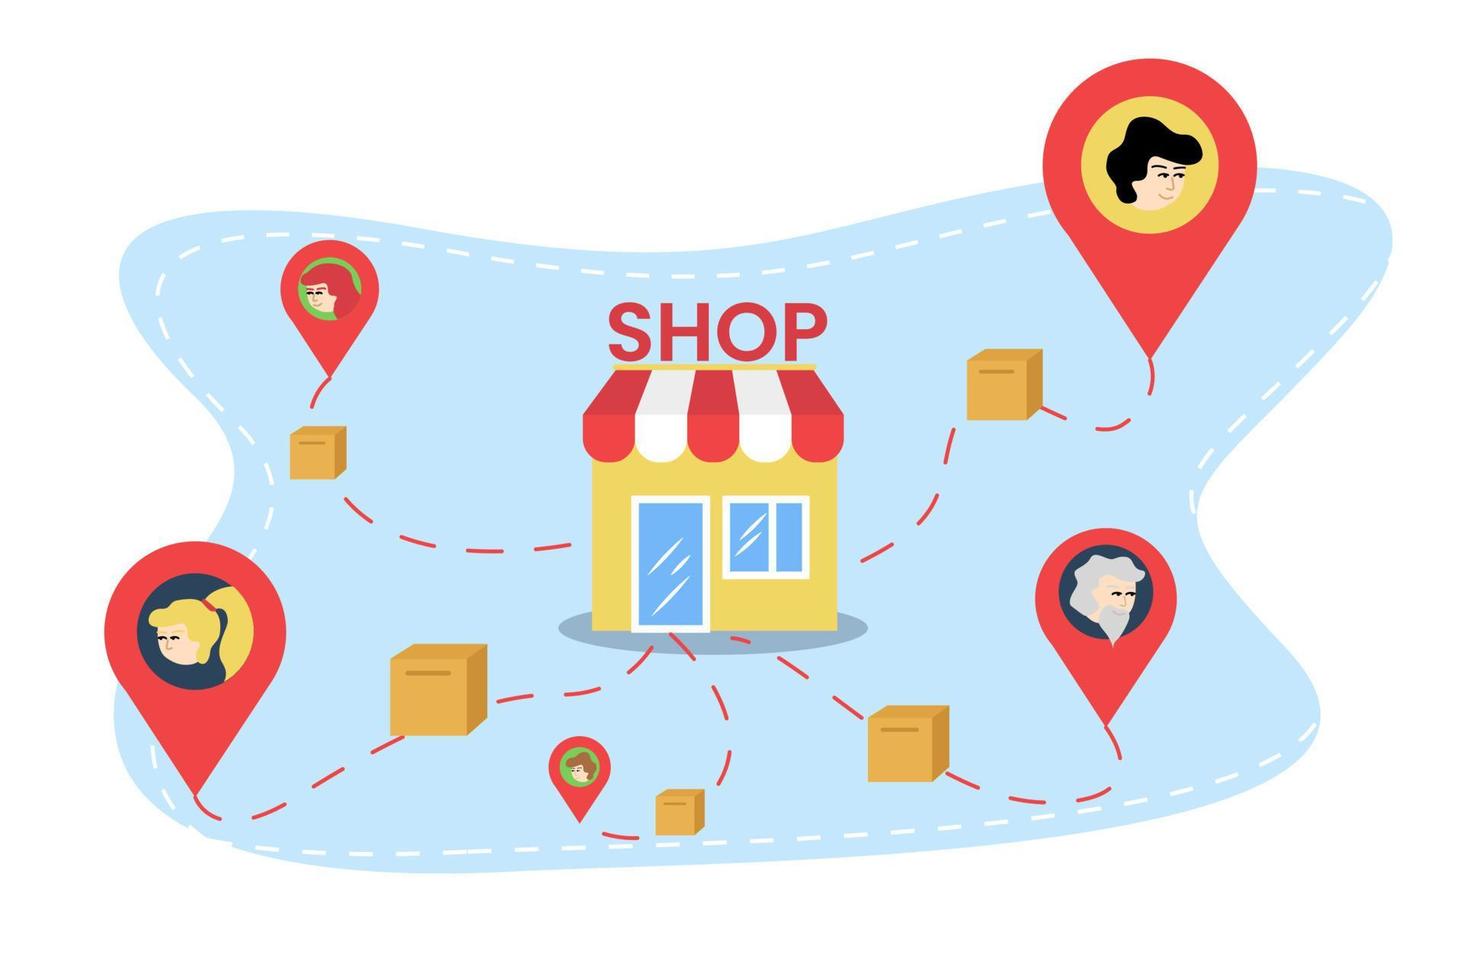 Delivery illustration. Goods delivery. The store from which the path is indicated by the dotted line on which the box leads to location icons. Shop, location icons with the image of people, boxes. vector